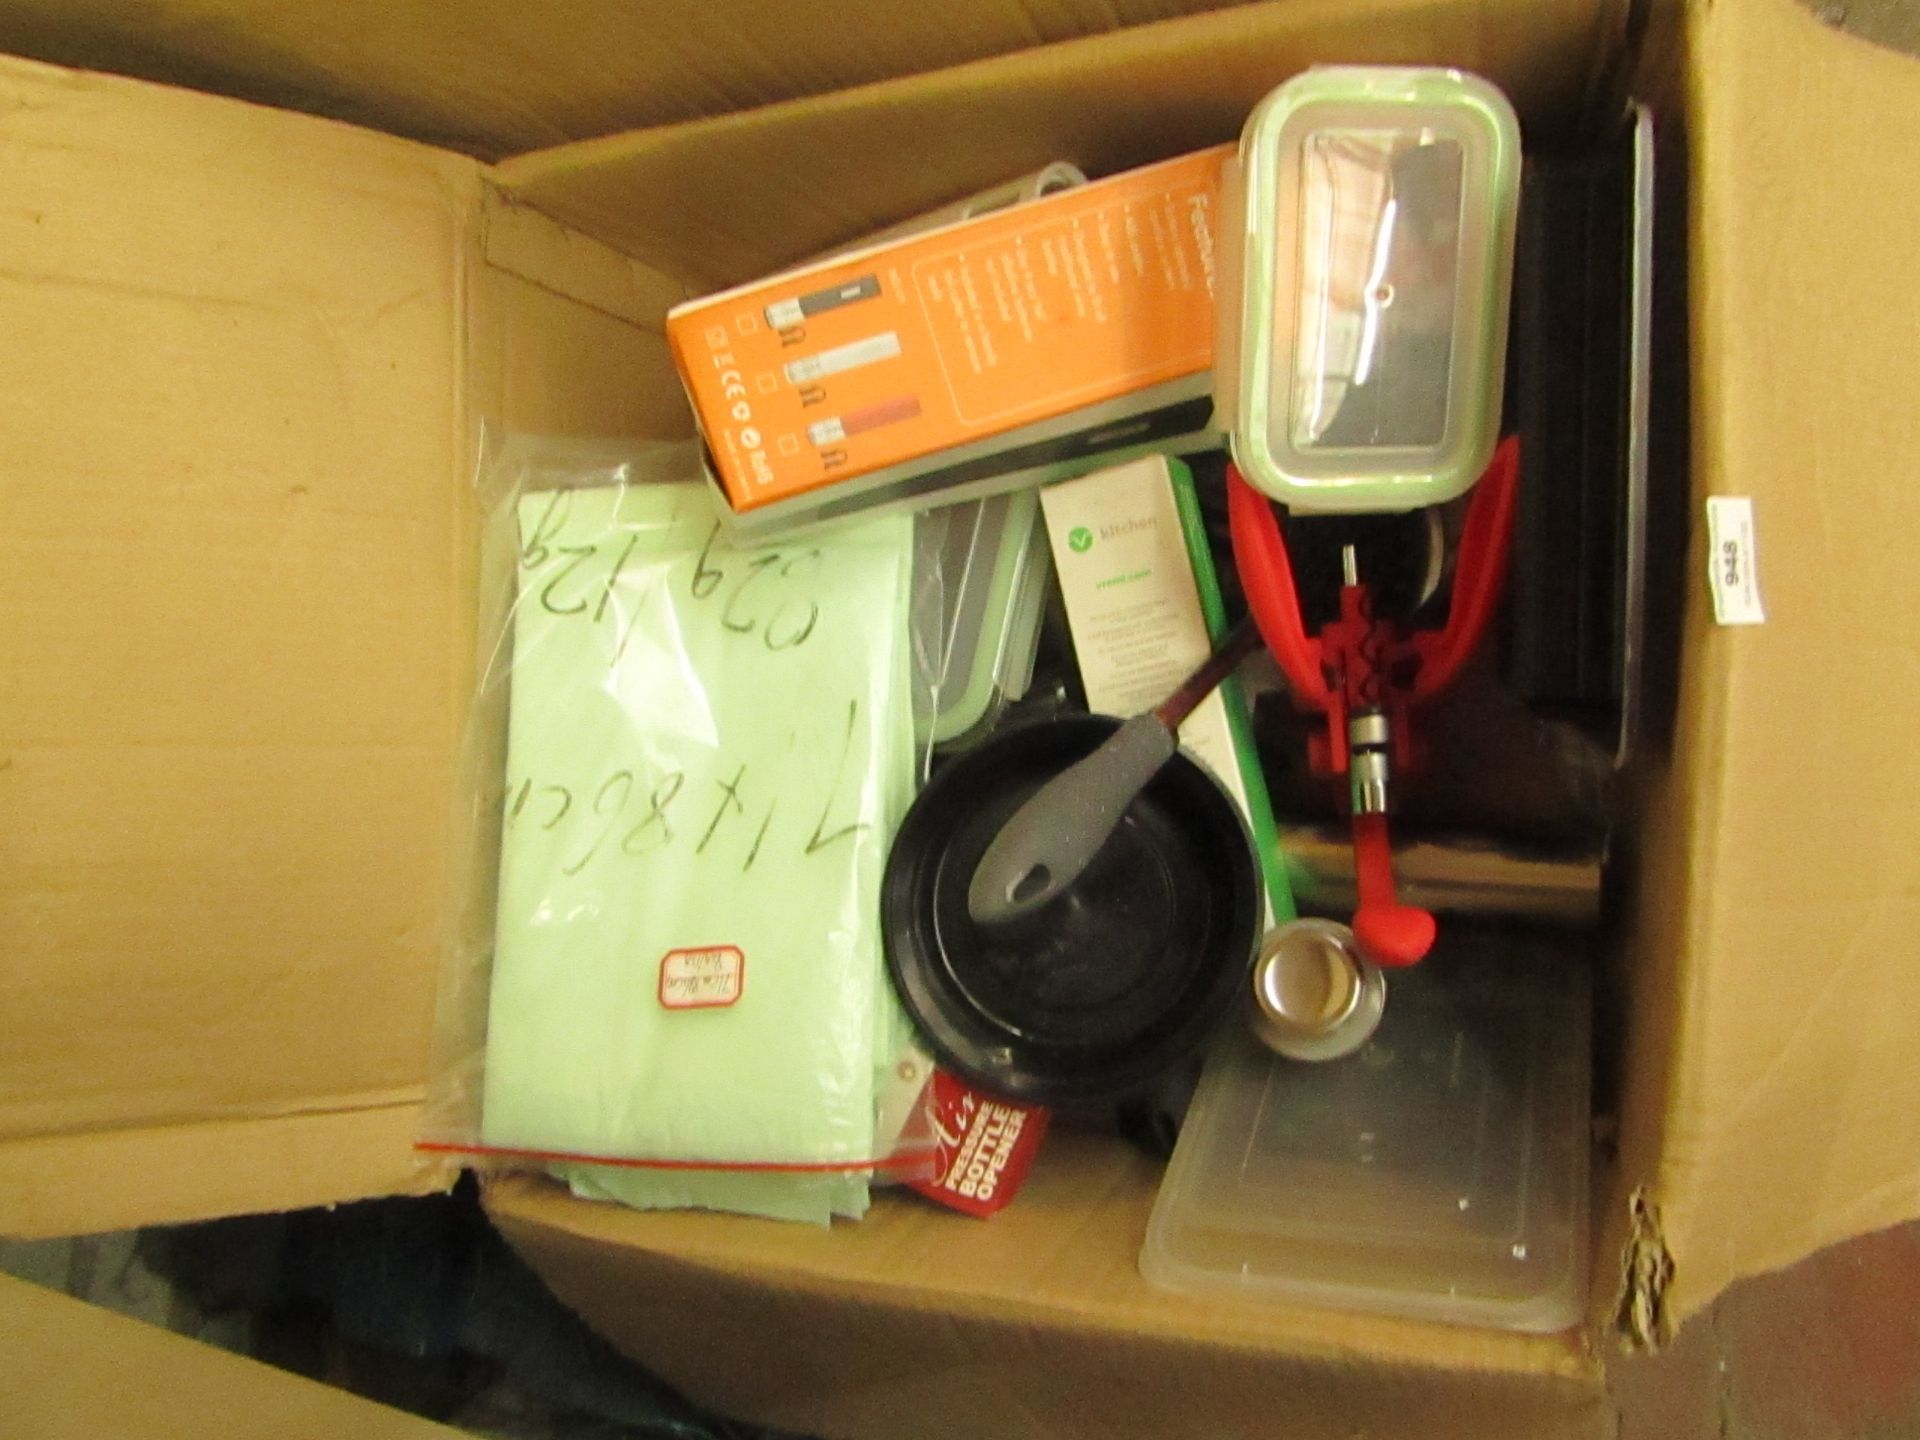 Box of Approx 15 Household/Kitchen items. See image